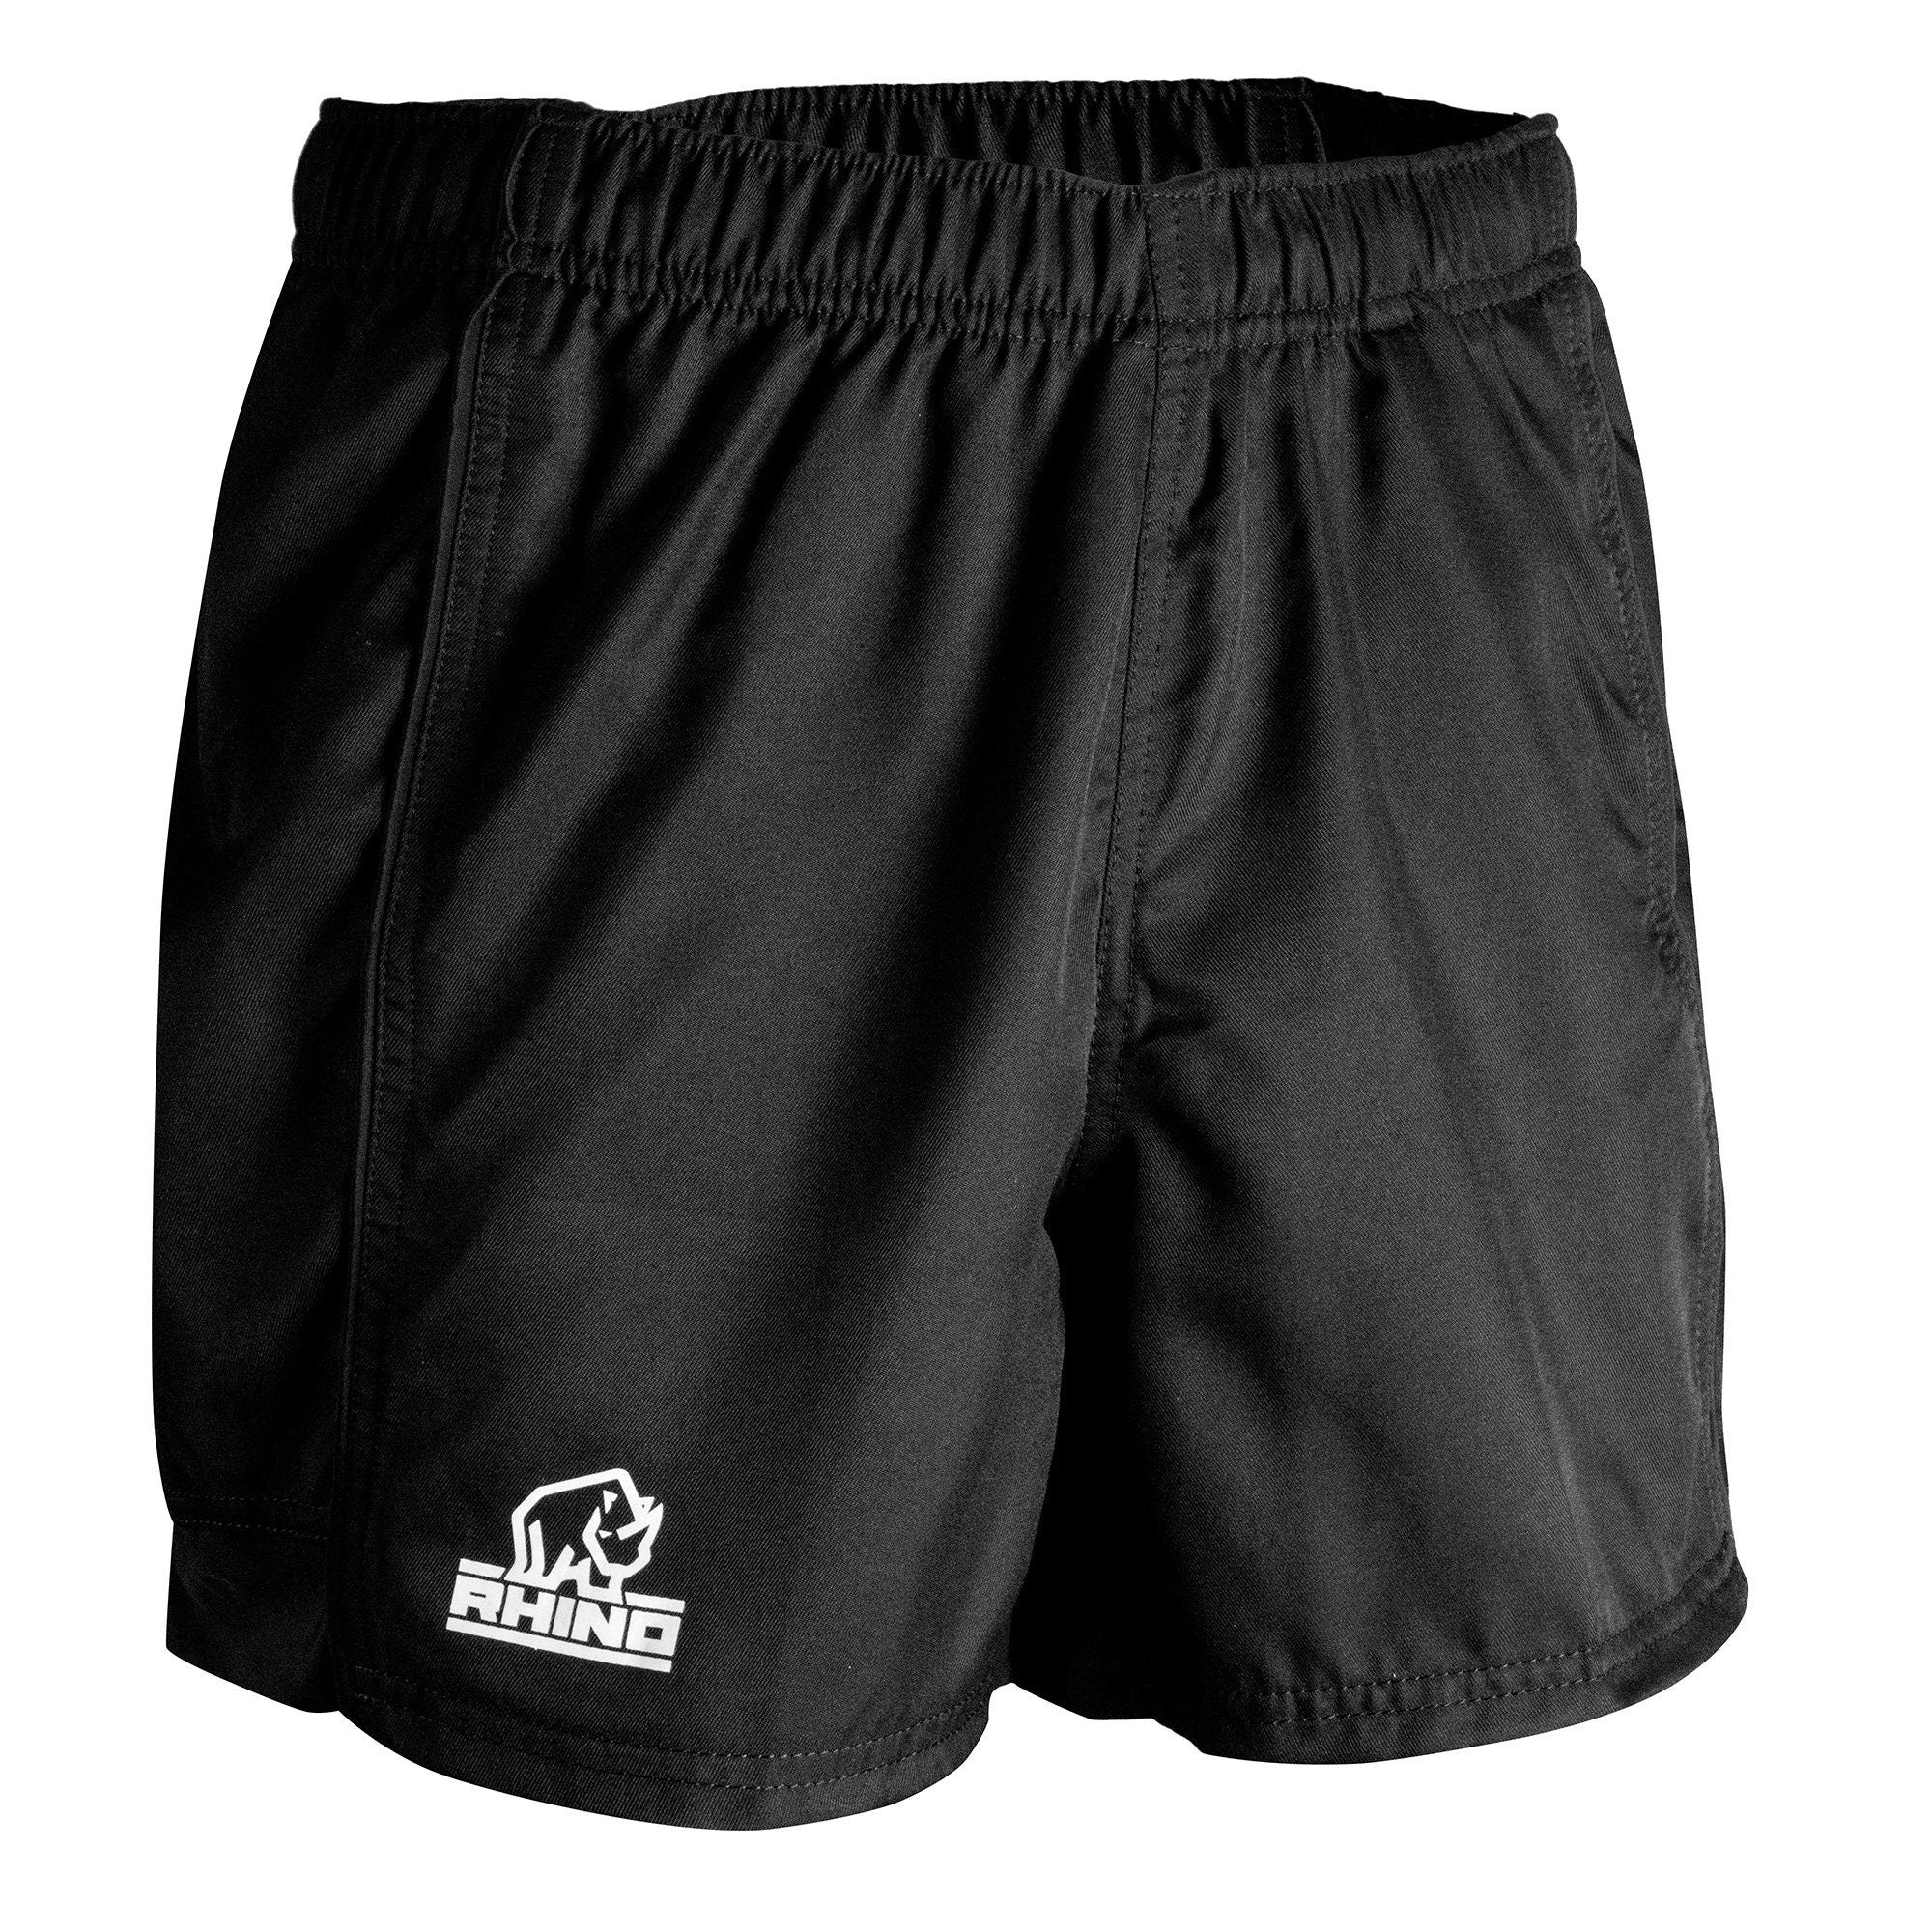 Rhino Auckland Adults Rugby Shorts